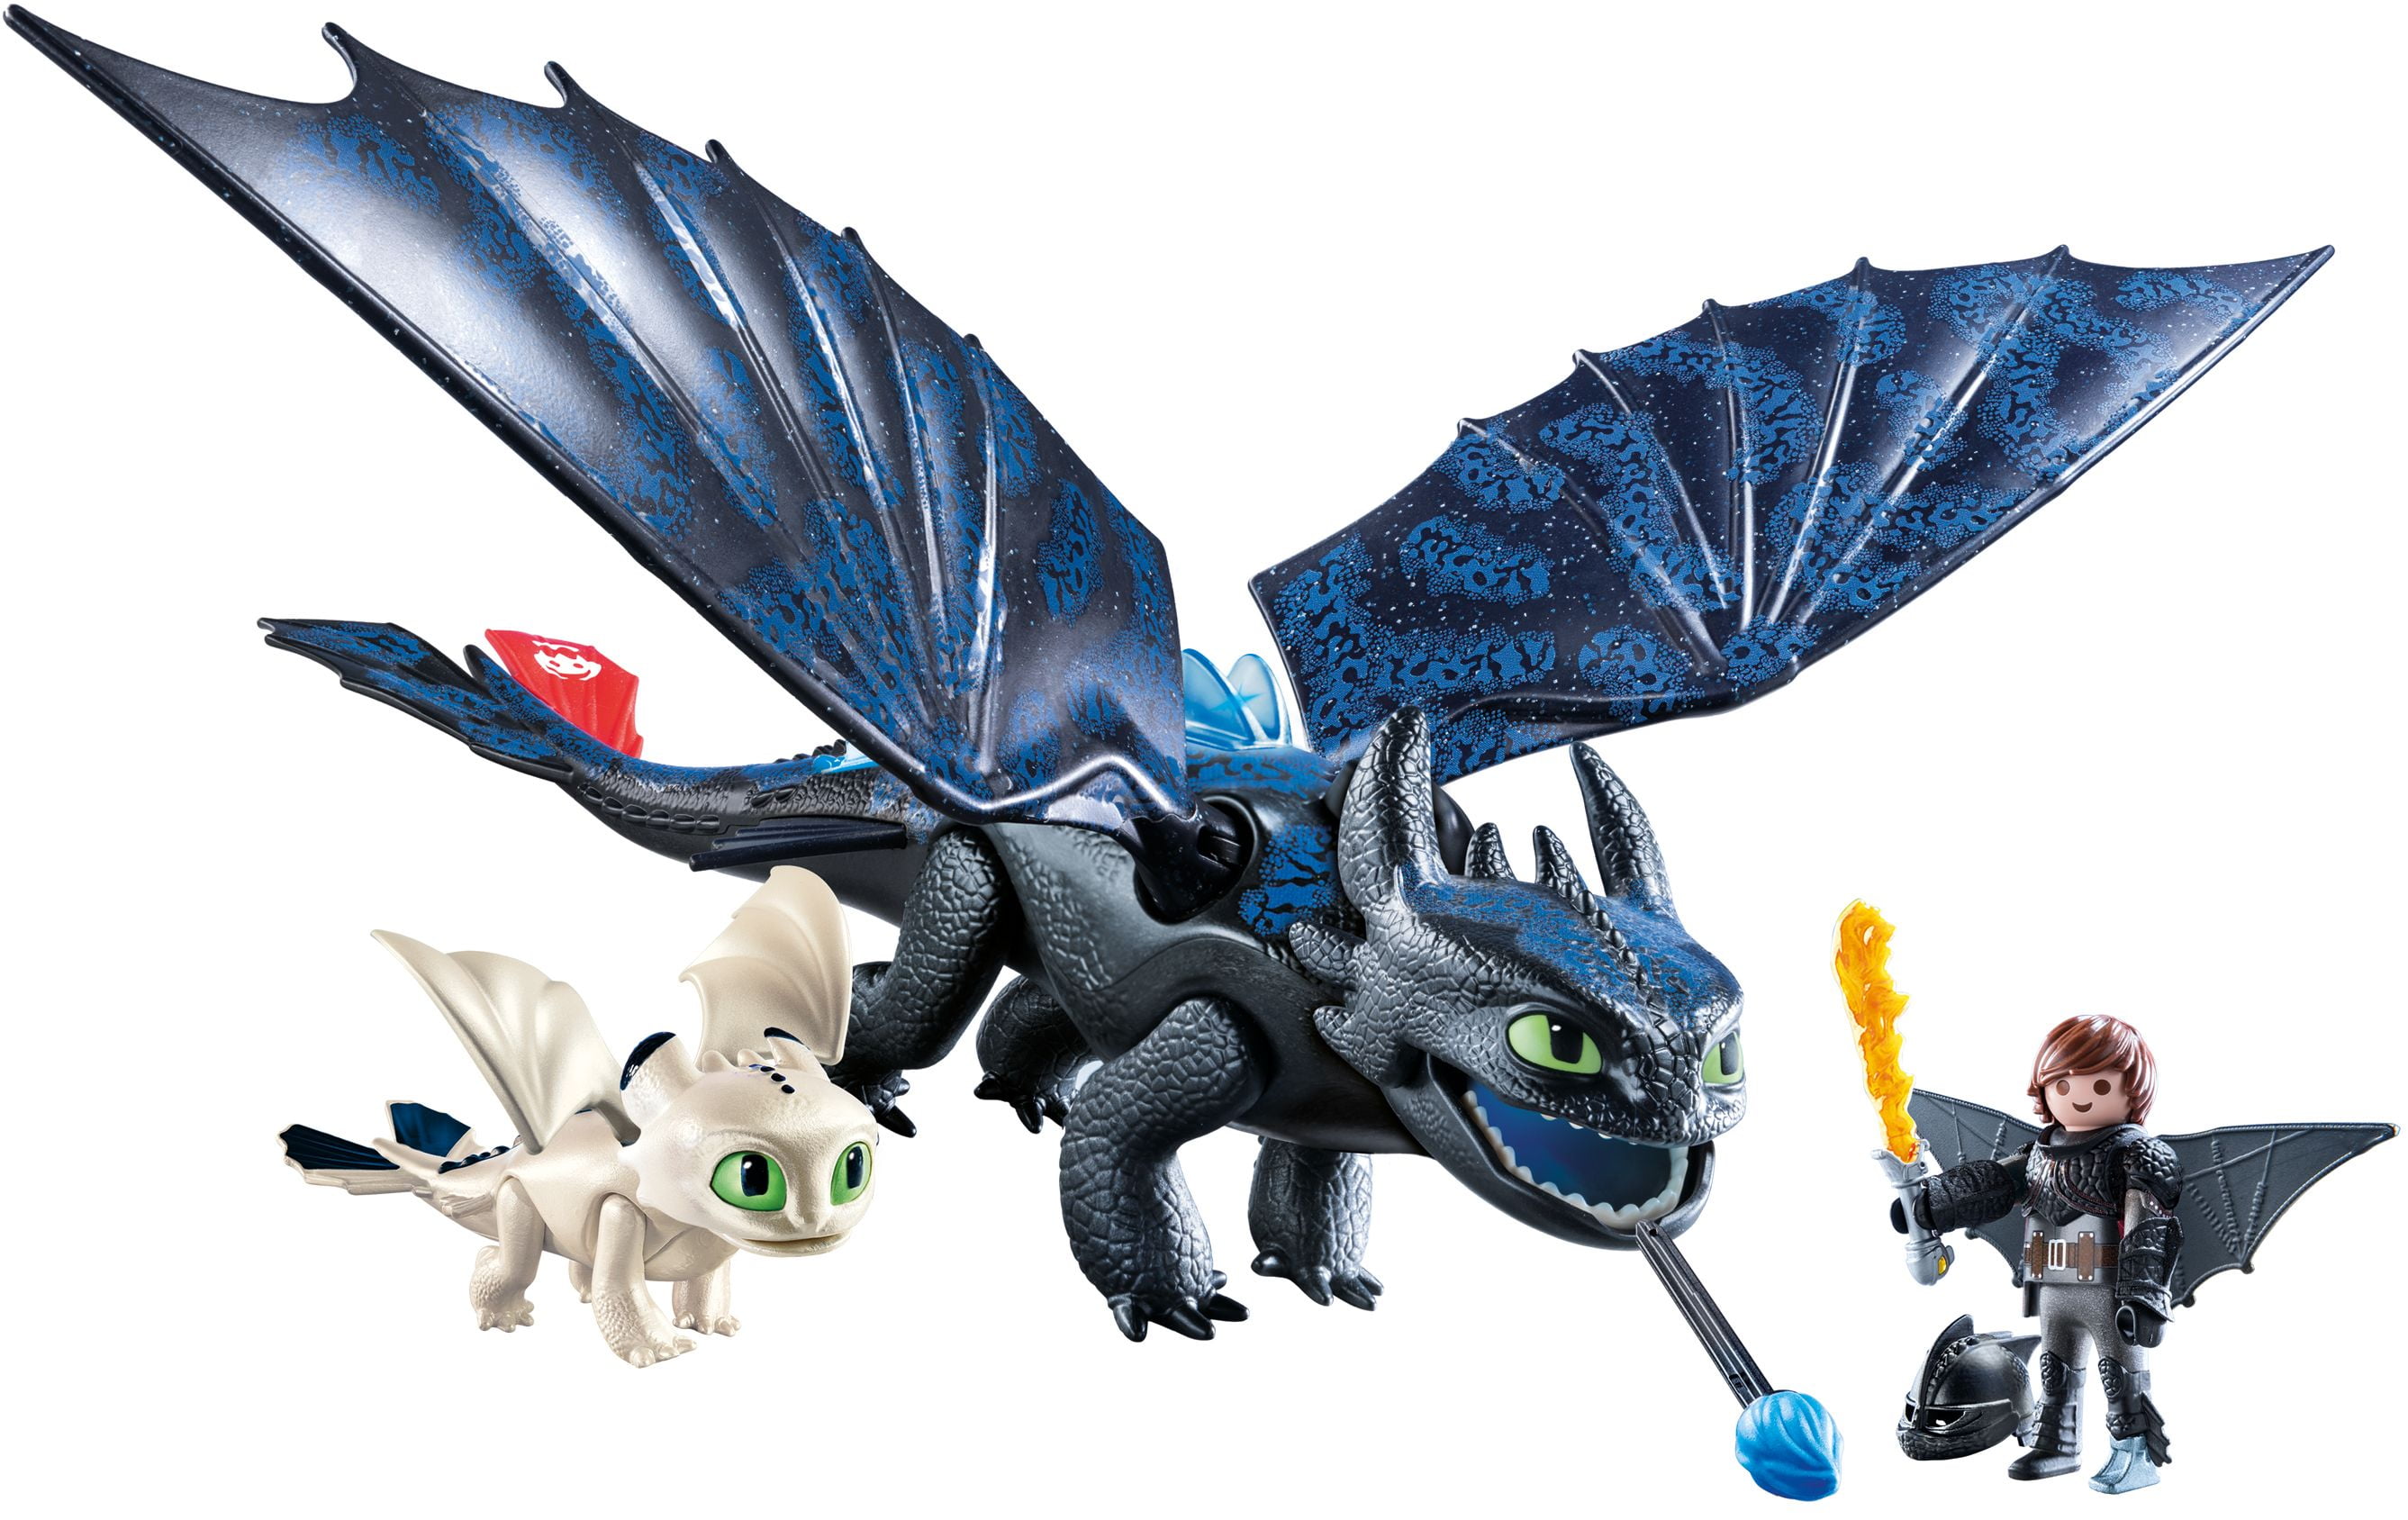 Playmobil 9246 DreamWorks Dragons Hiccup and Toothless with LED Light Effects